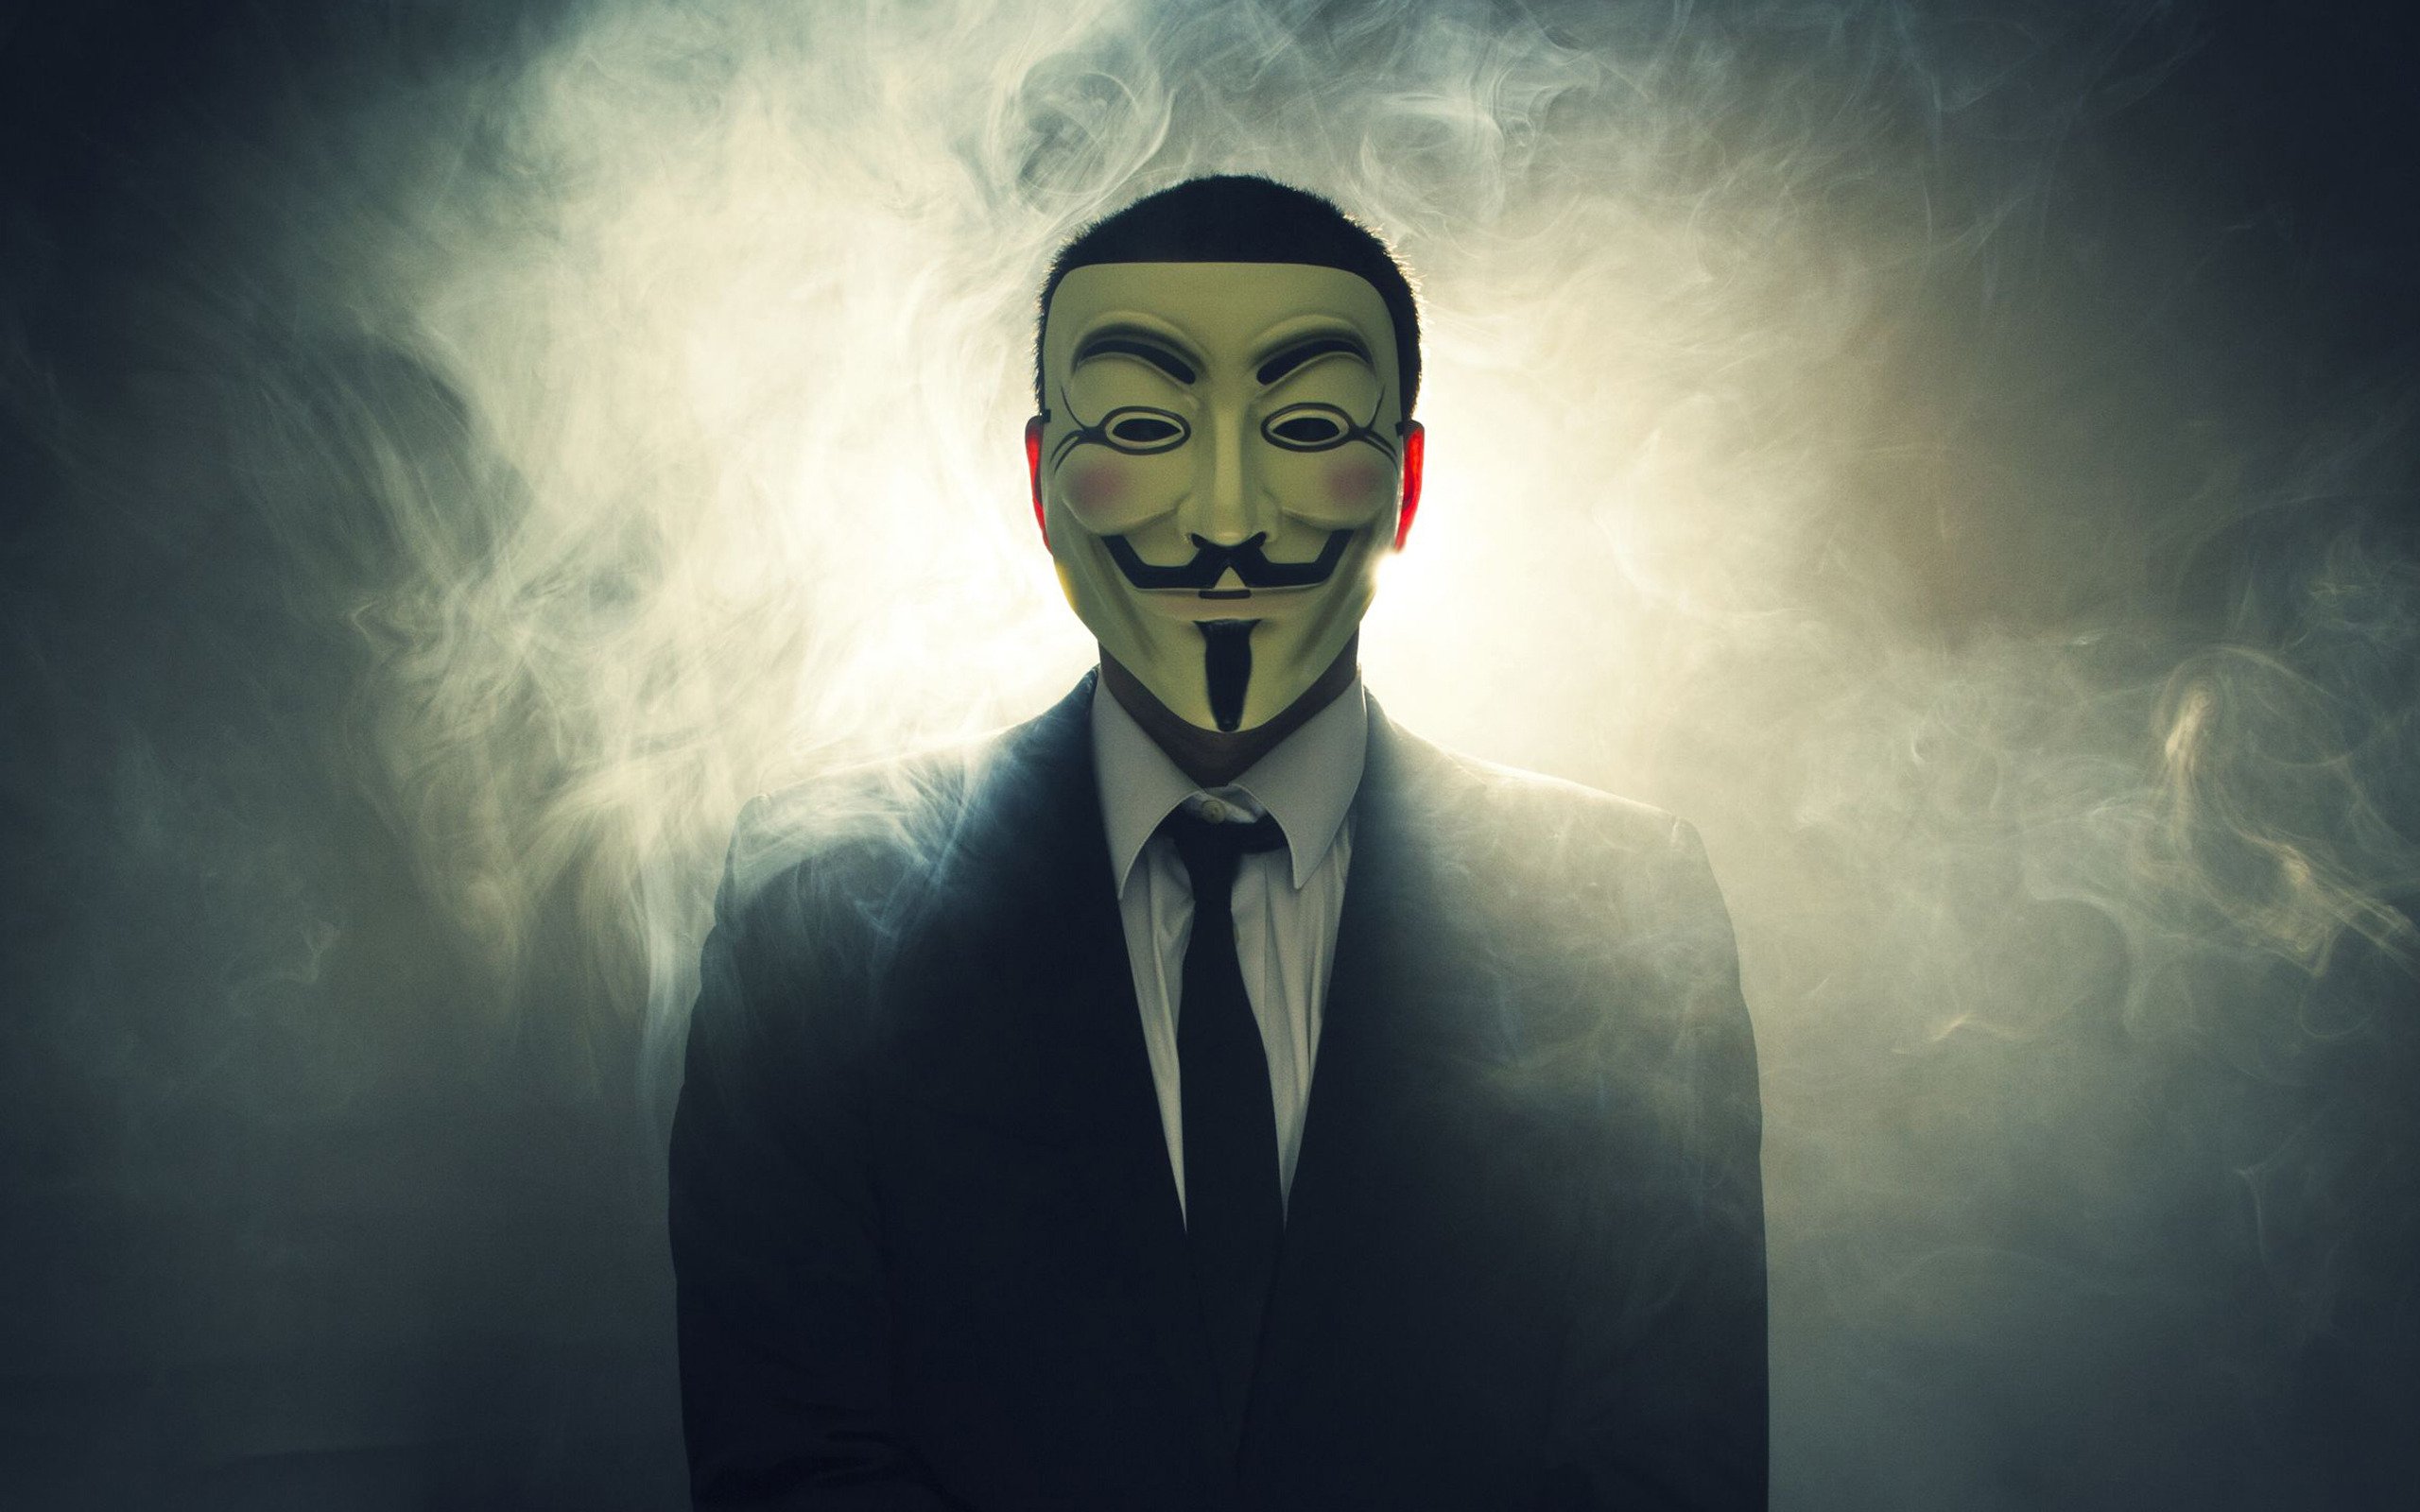 Tlcharger gratuitement Anonymous Wallpapers Full HD wallpaper 2560x1600